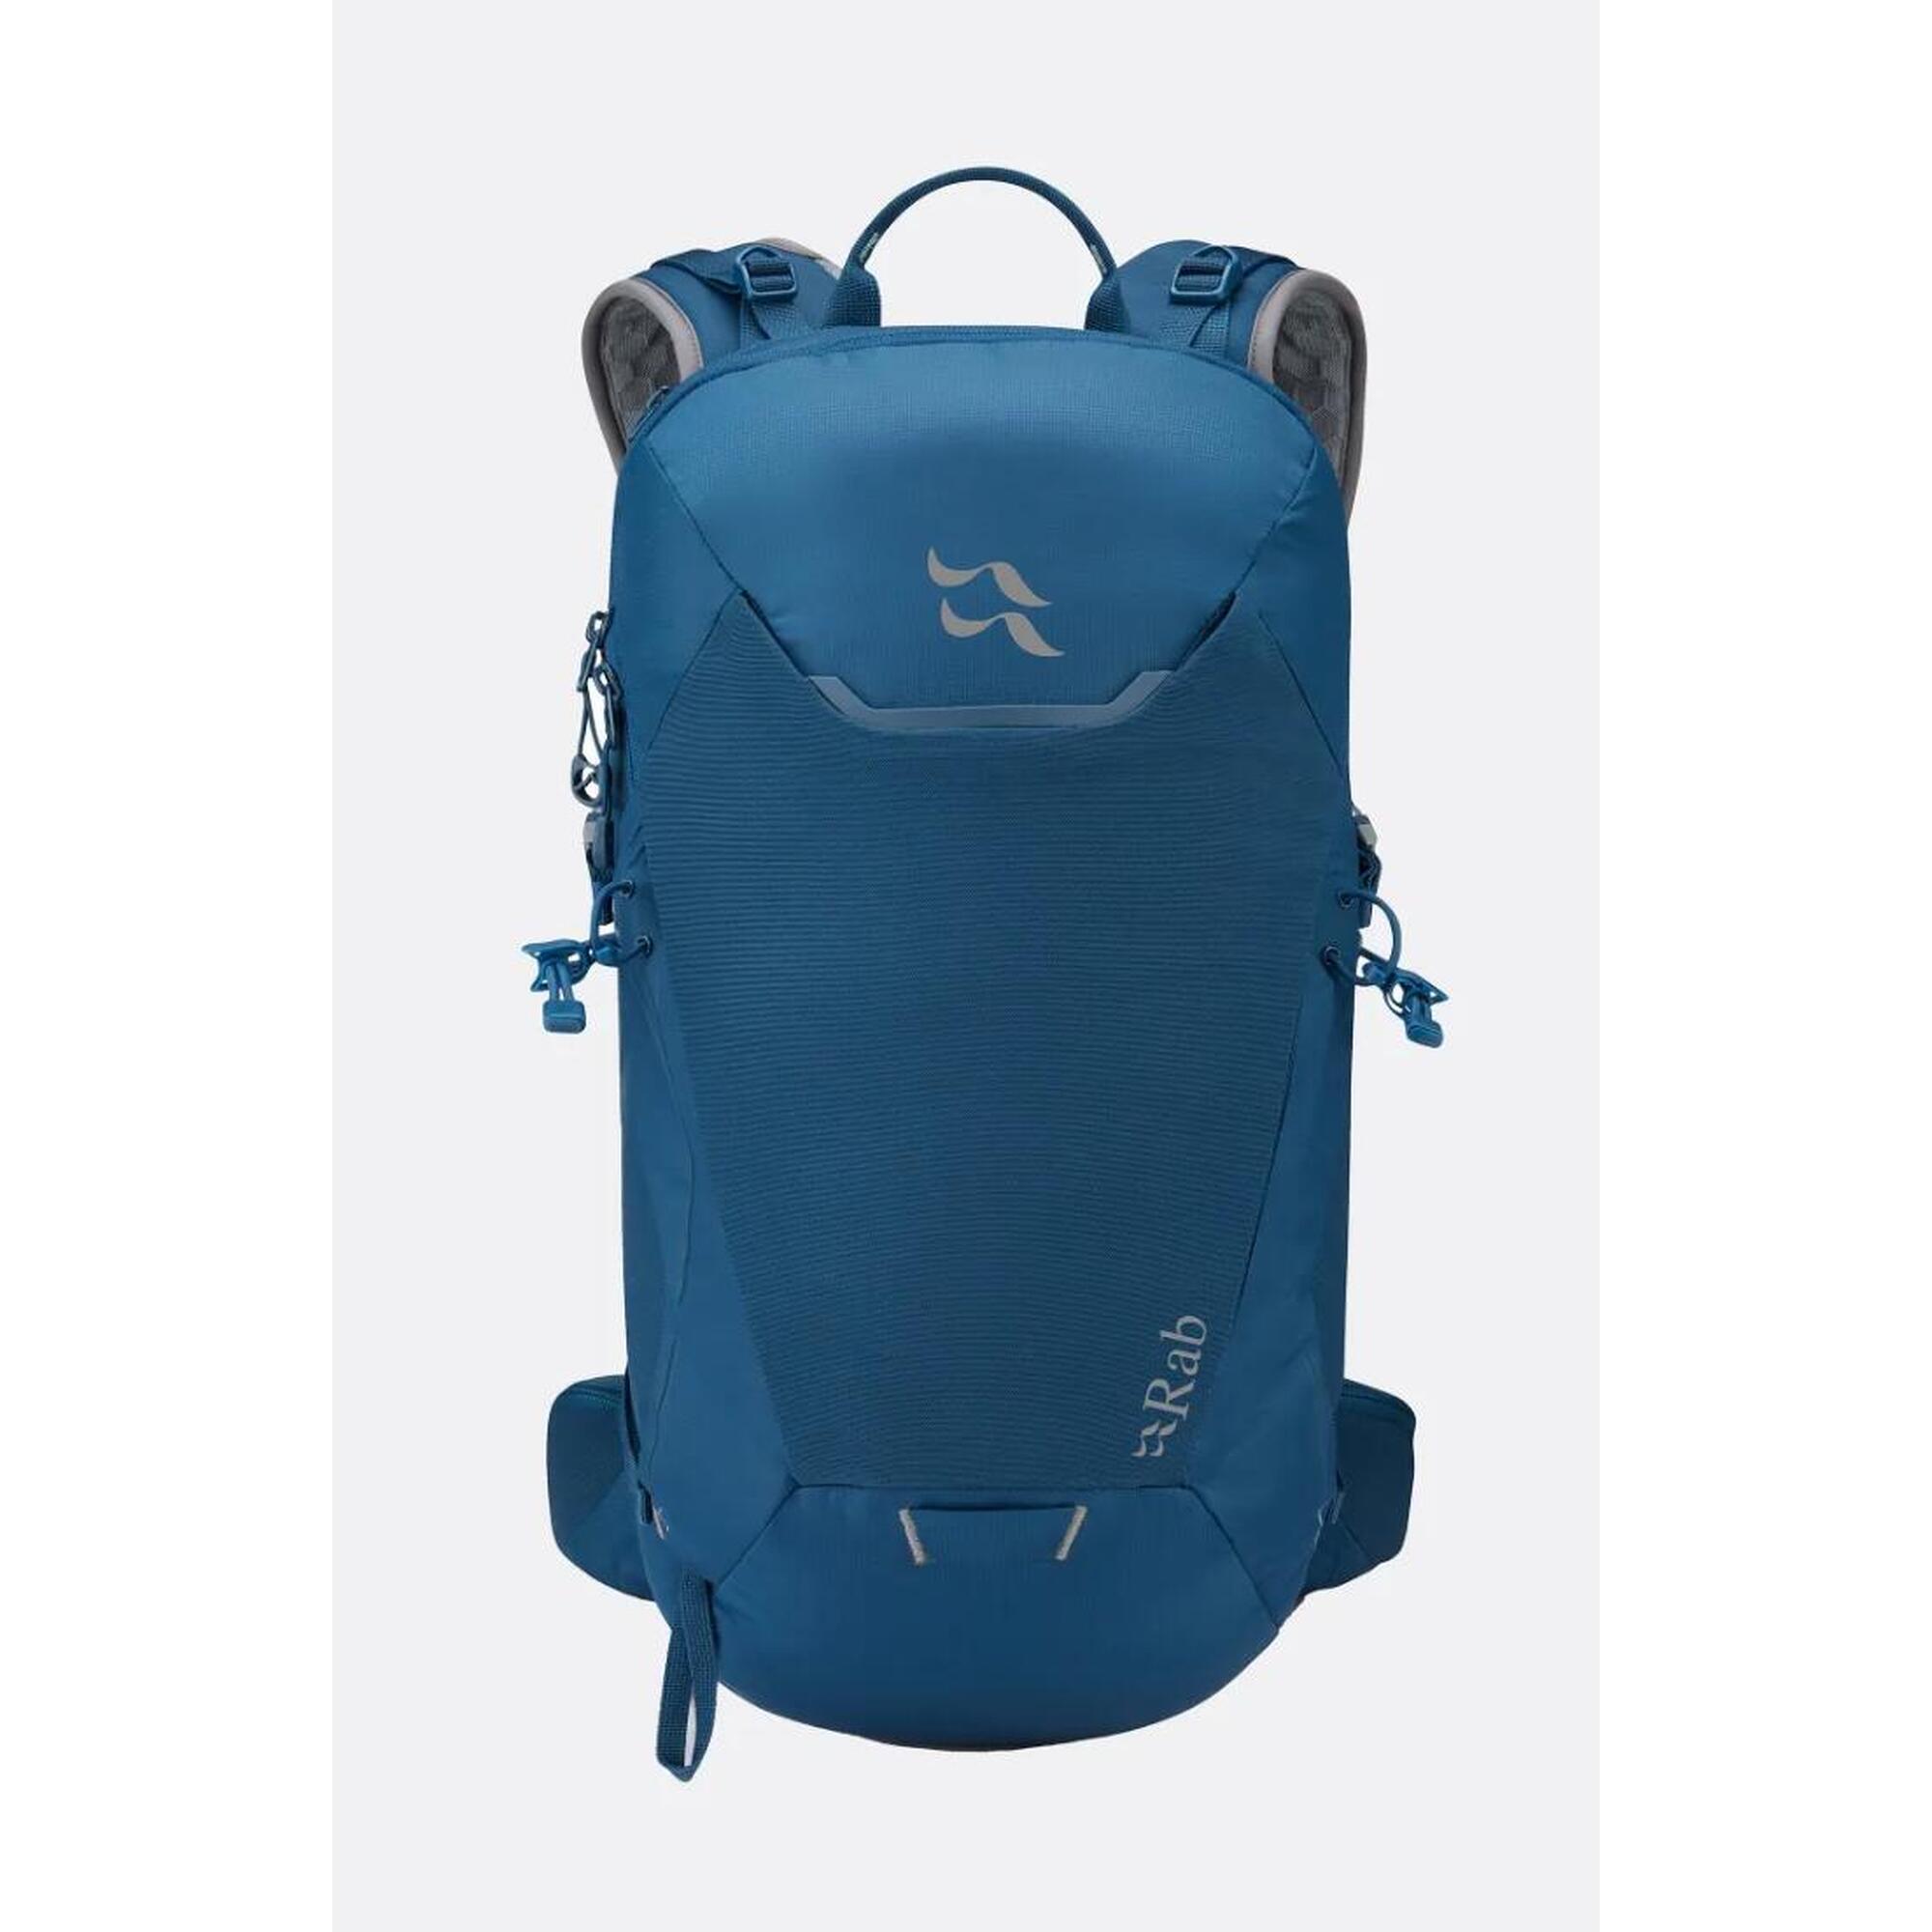 Aeon Backpack 20L - Blue